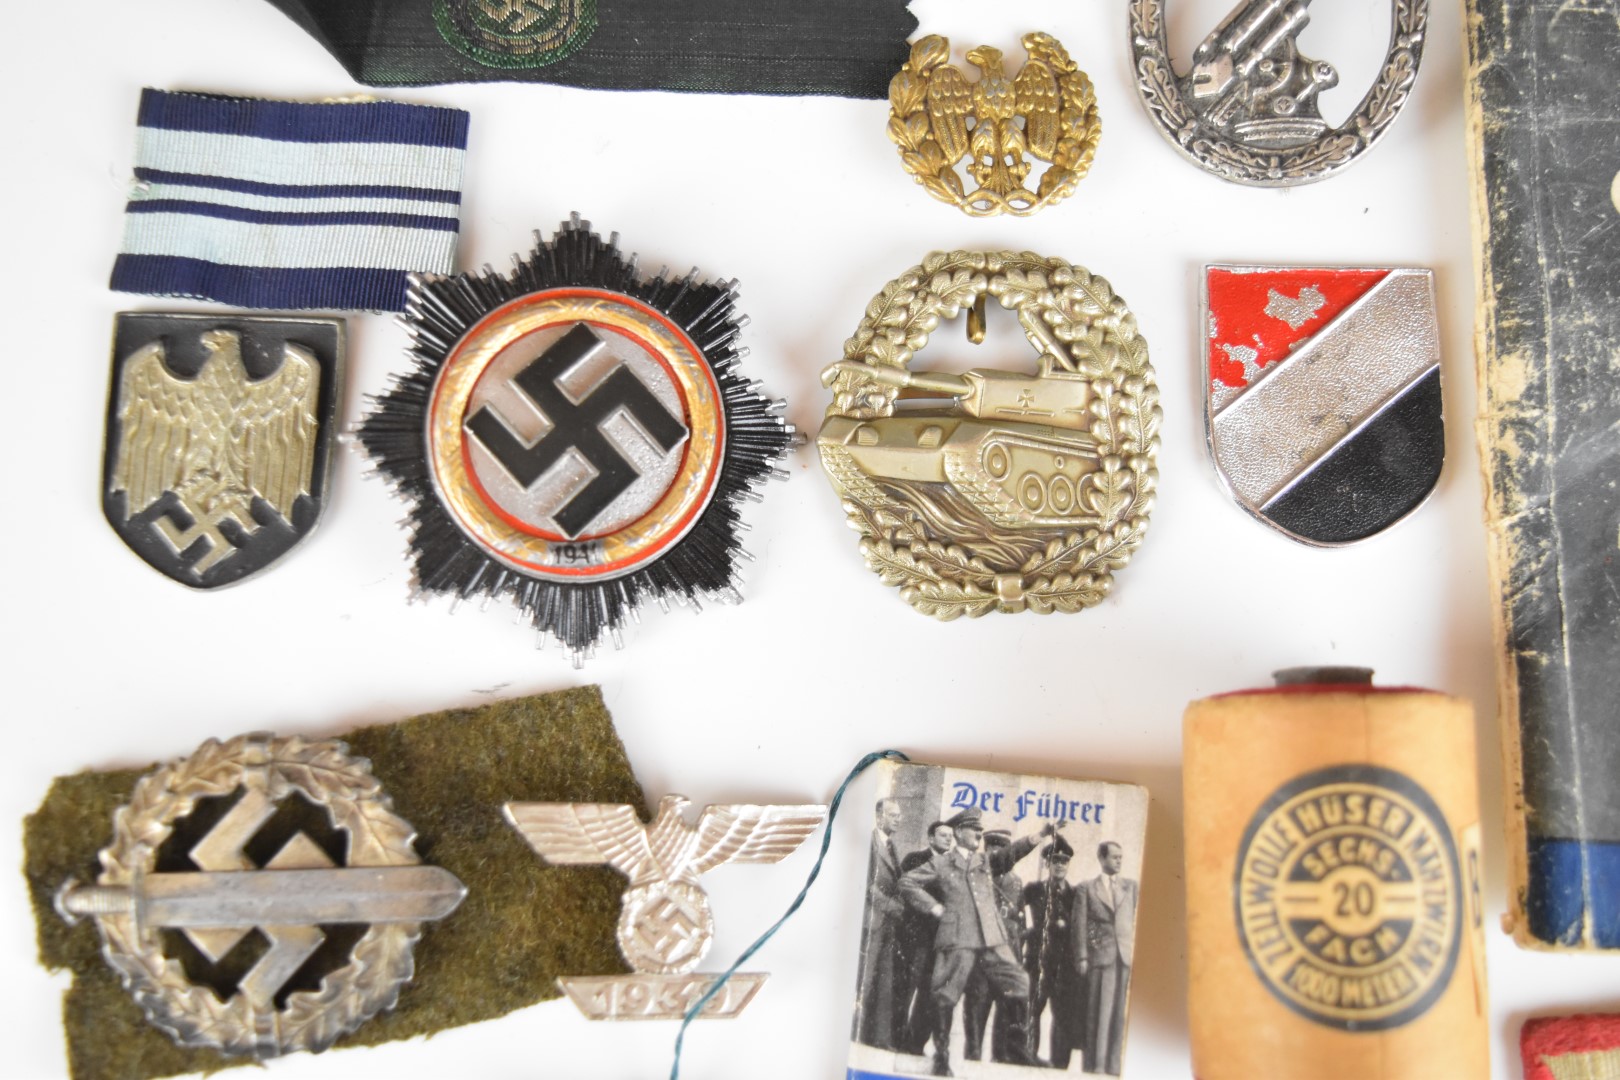 Mainly reproduction German WW2 Nazi insignia, booklets etc - Image 6 of 16